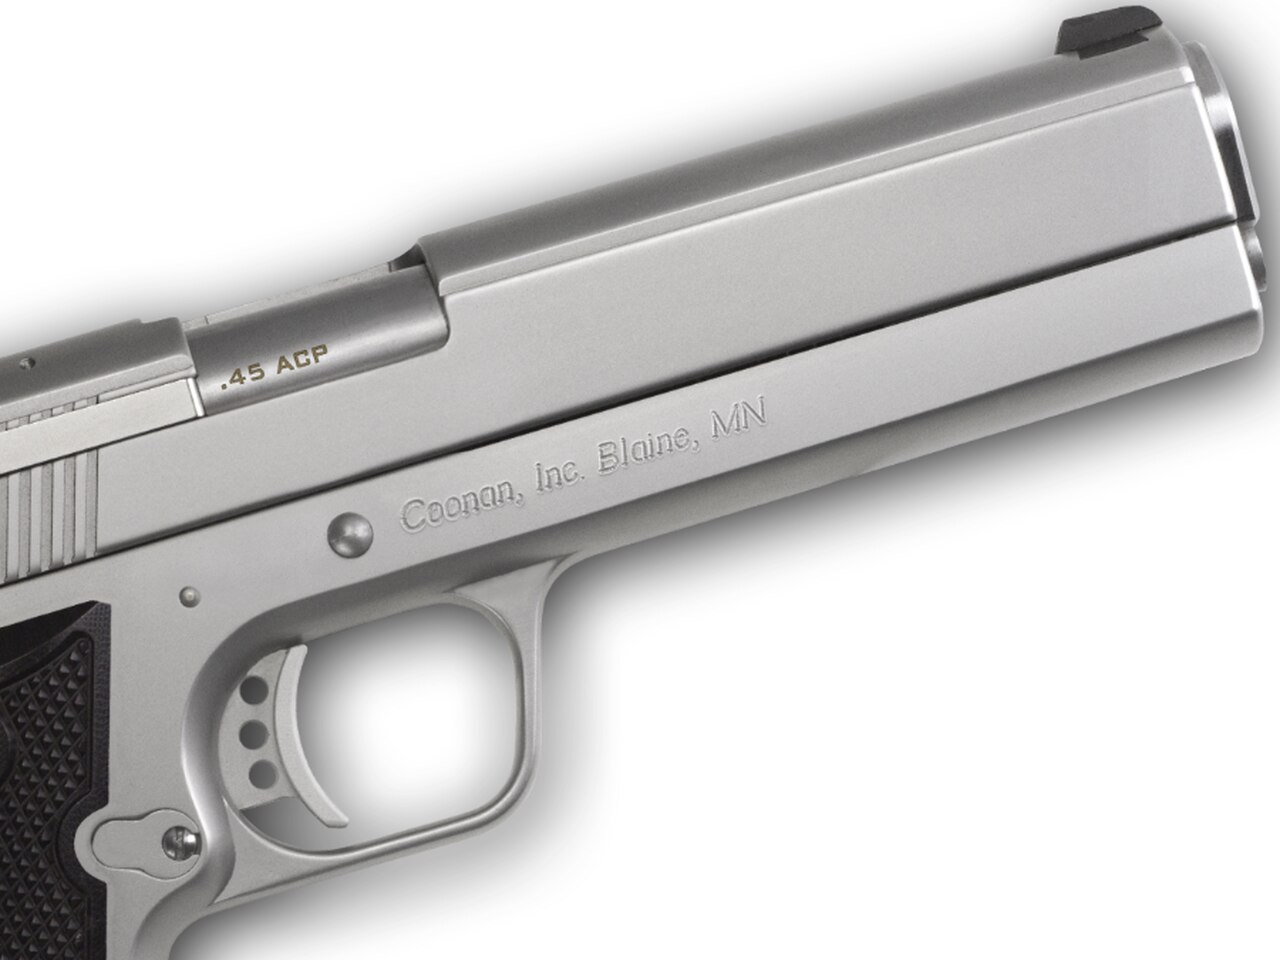 Image of Coonan MOT 45 ACP, 5", Satin Stainless, Adj. Night Sights, Black Alum Grips, 2 Mags (Special Order)